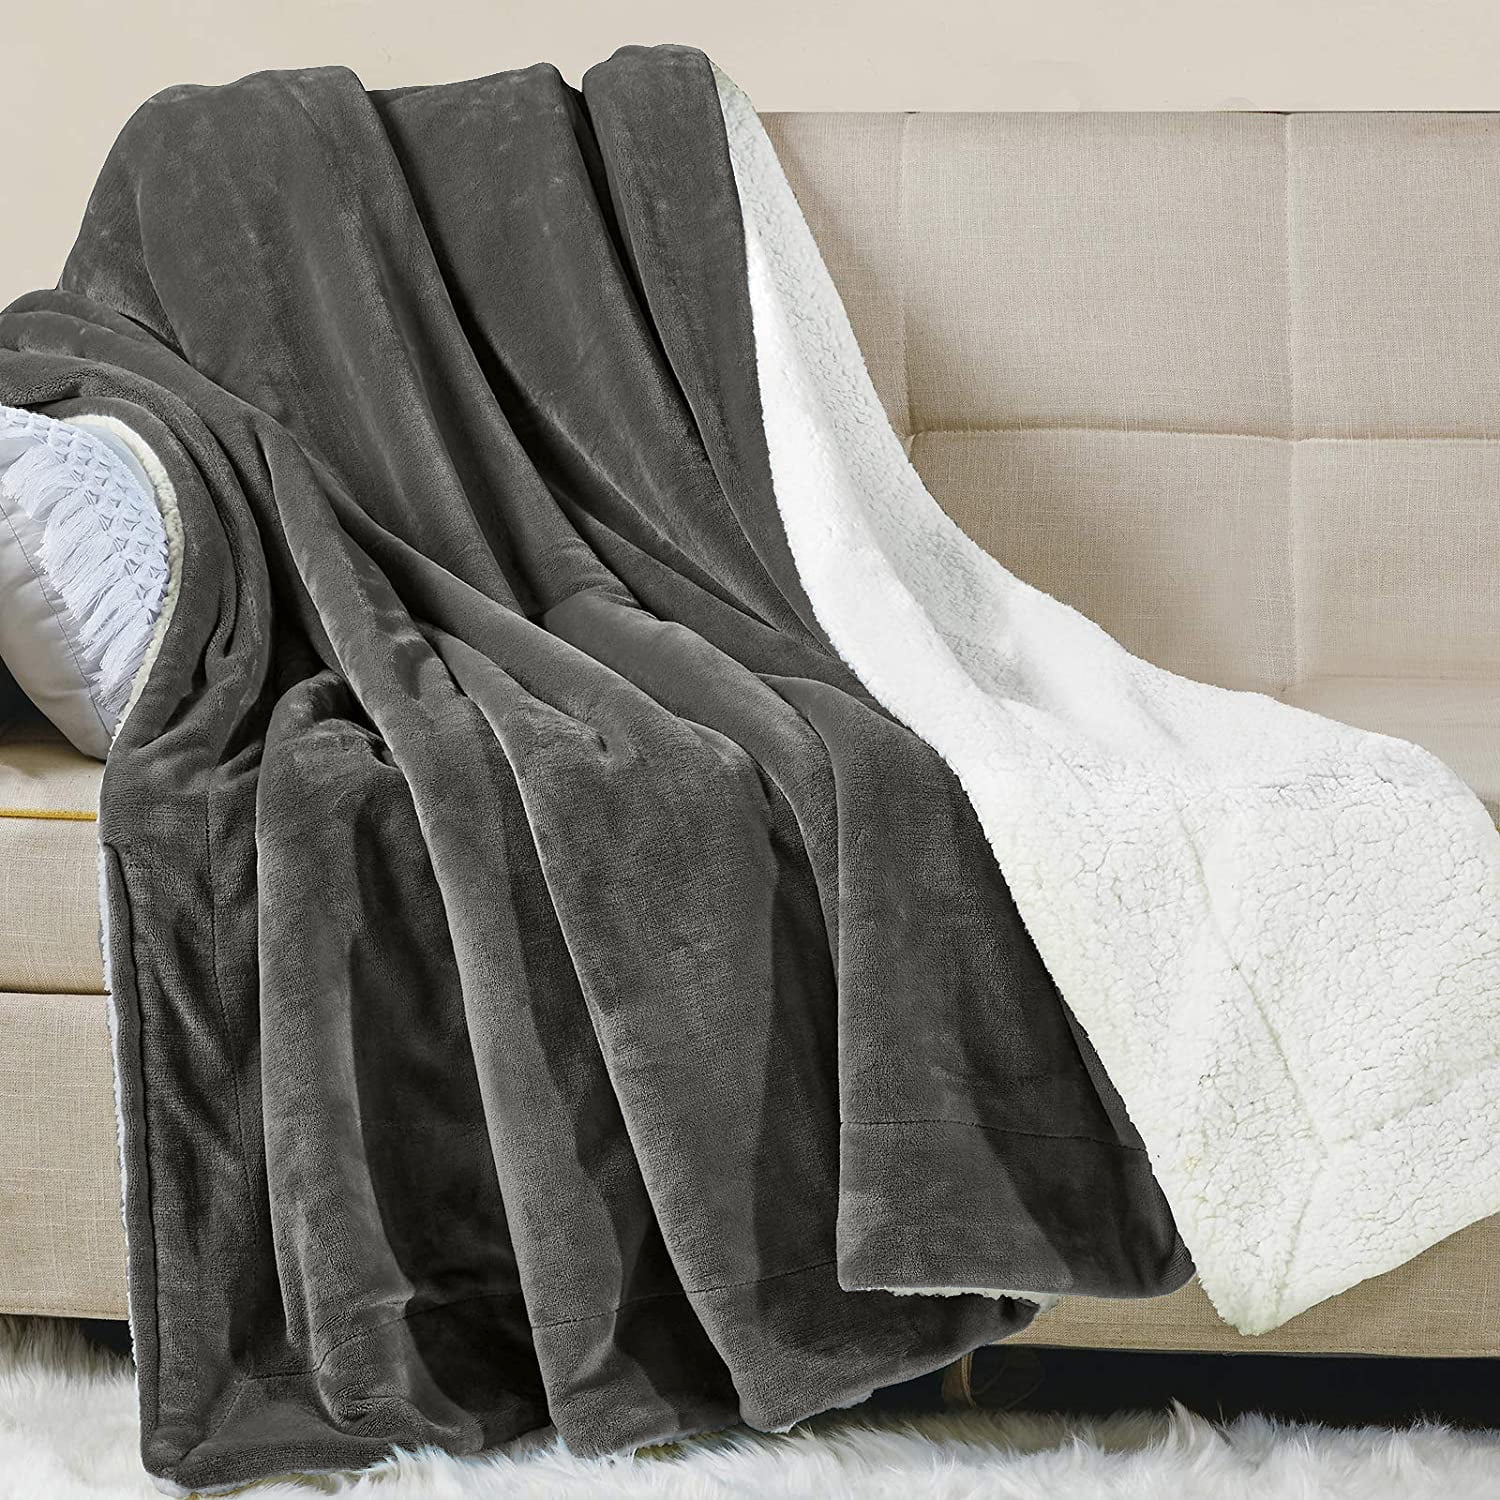 Cream Sherpa Fleece Throw Blanket and Throws,Super Soft Blanket Fuzzy Plush Bedding Blanket Bed Throws.Premium Cozy Blankets for Bed Couch Sofa Lightweight Bed Blanket Best Comfy Blankets 51x63